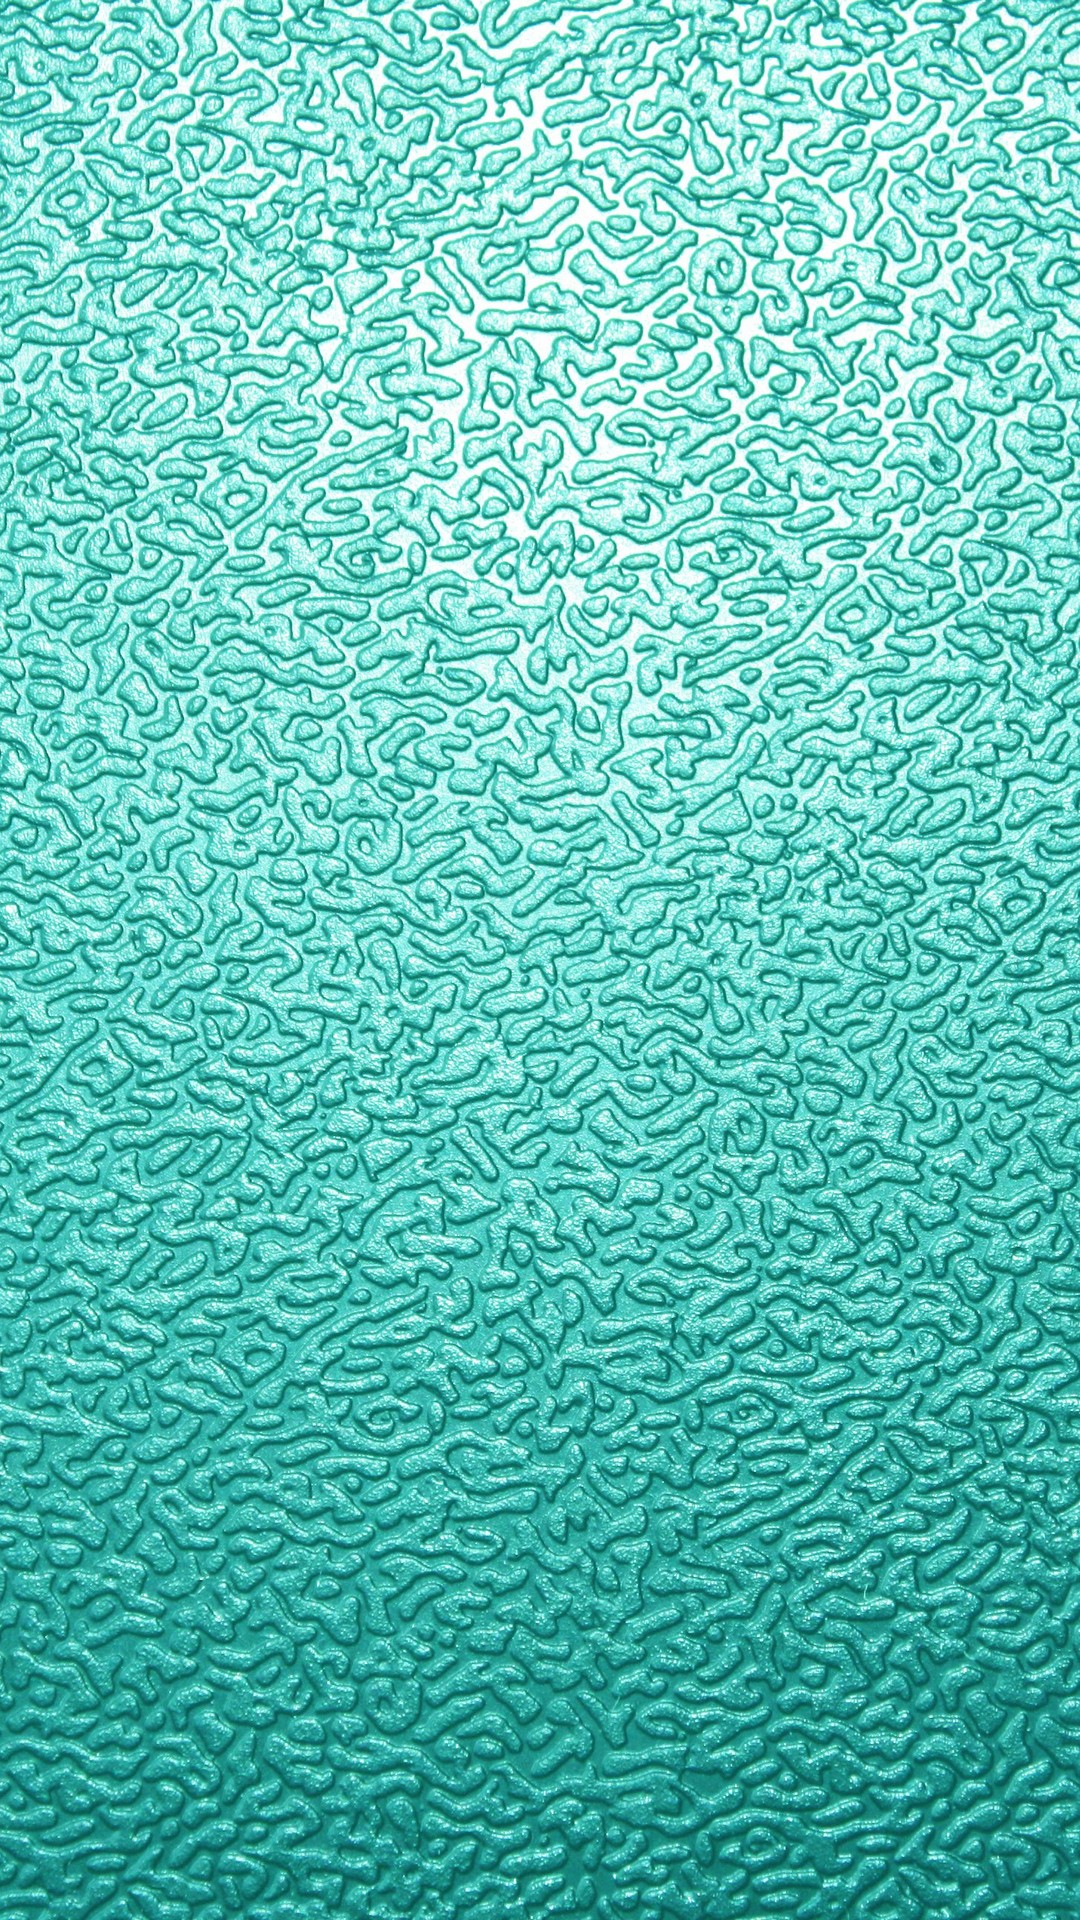 Wallpaper Teal Mobile With Resolution 1080X1920 pixel. You can make this wallpaper for your Desktop Computer Backgrounds, Mac Wallpapers, Android Lock screen or iPhone Screensavers